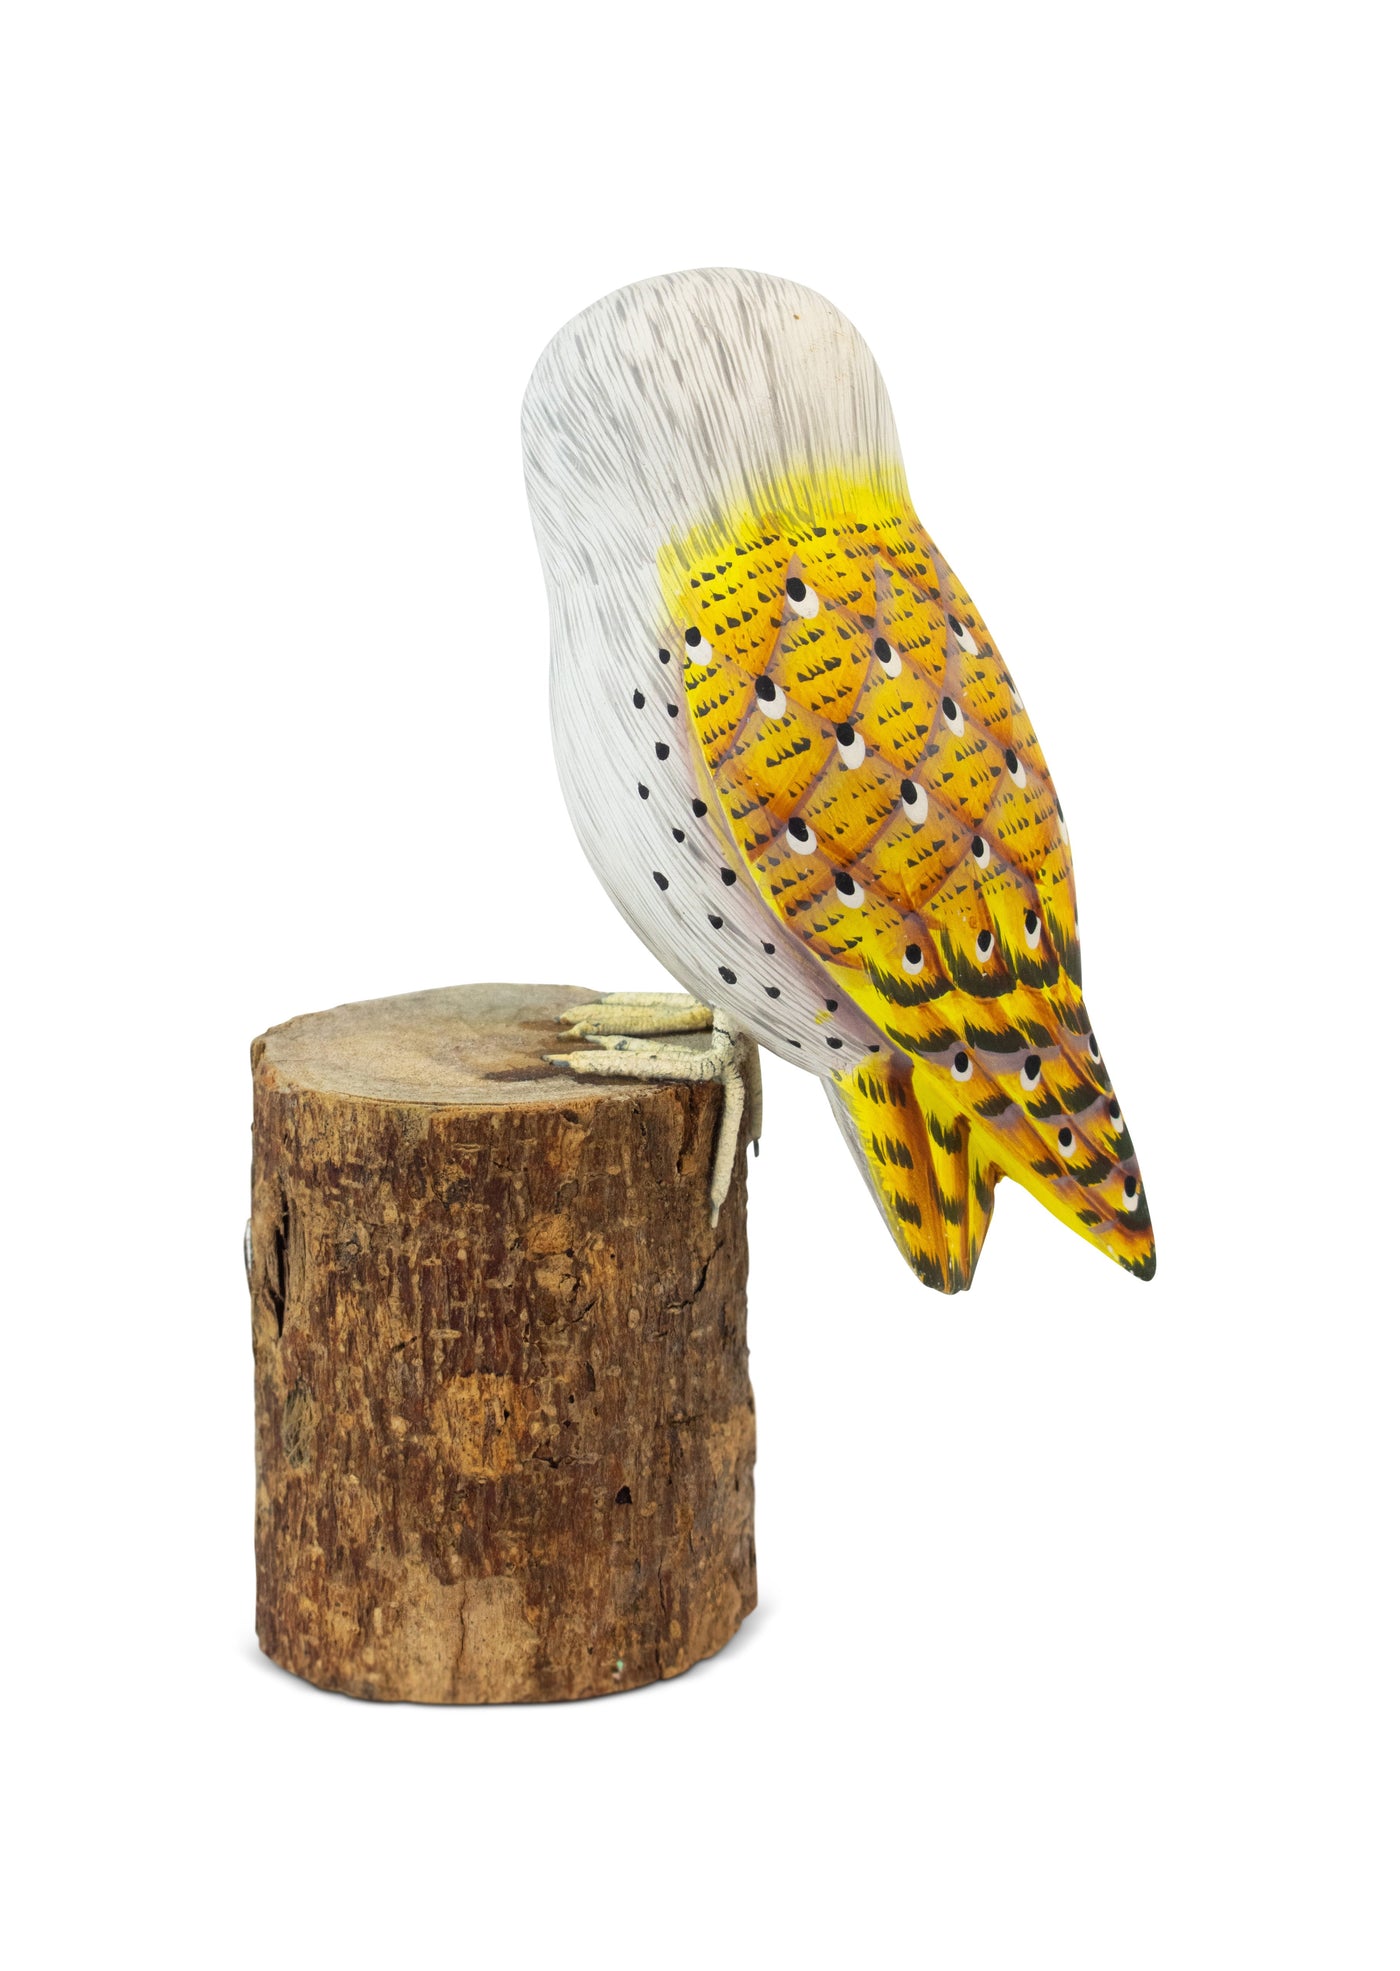 Wooden Hand Carved Yellow Barn Owl Standing on Log Statue Bird Figurine Sculpture Art Decorative Home Decor Accent Gift Handcrafted Decoration Handmade